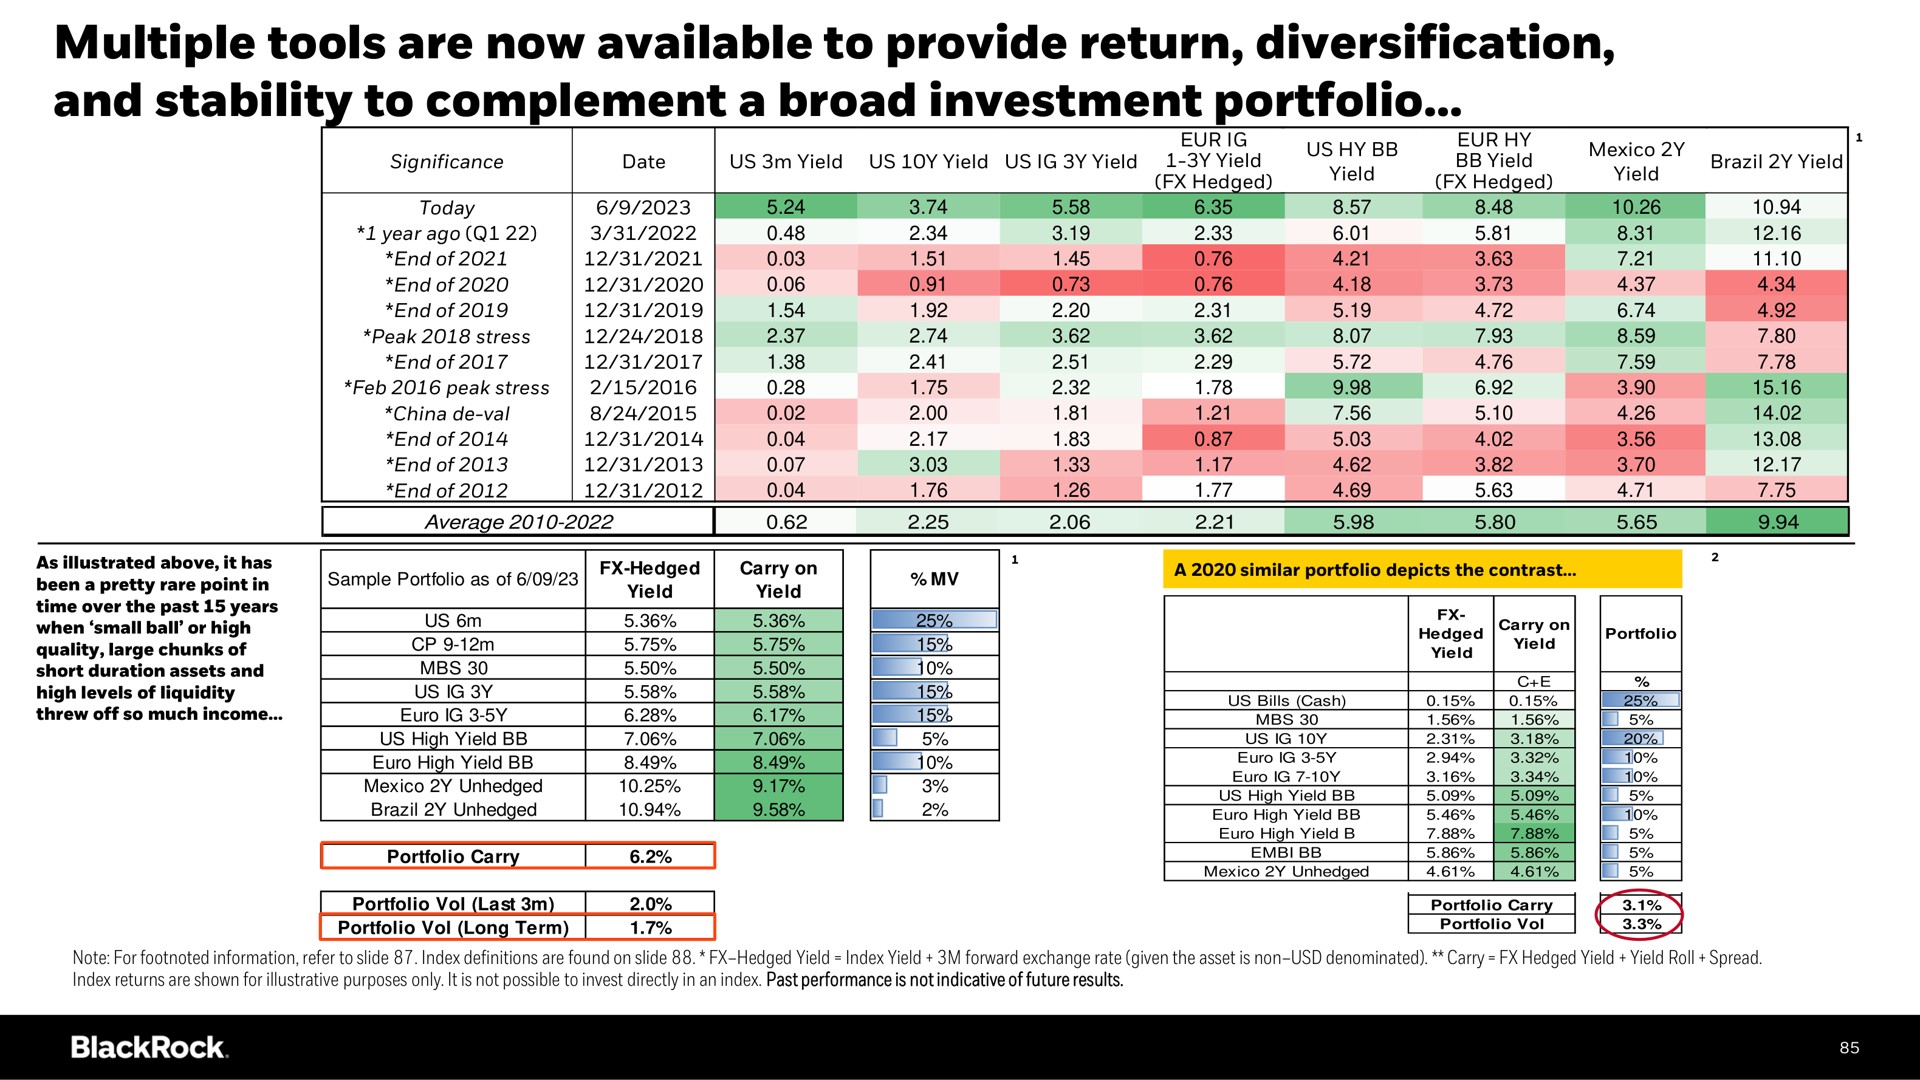 multiple tools are now available to provide return diversification and stability to complement a broad investment portfolio | BlackRock